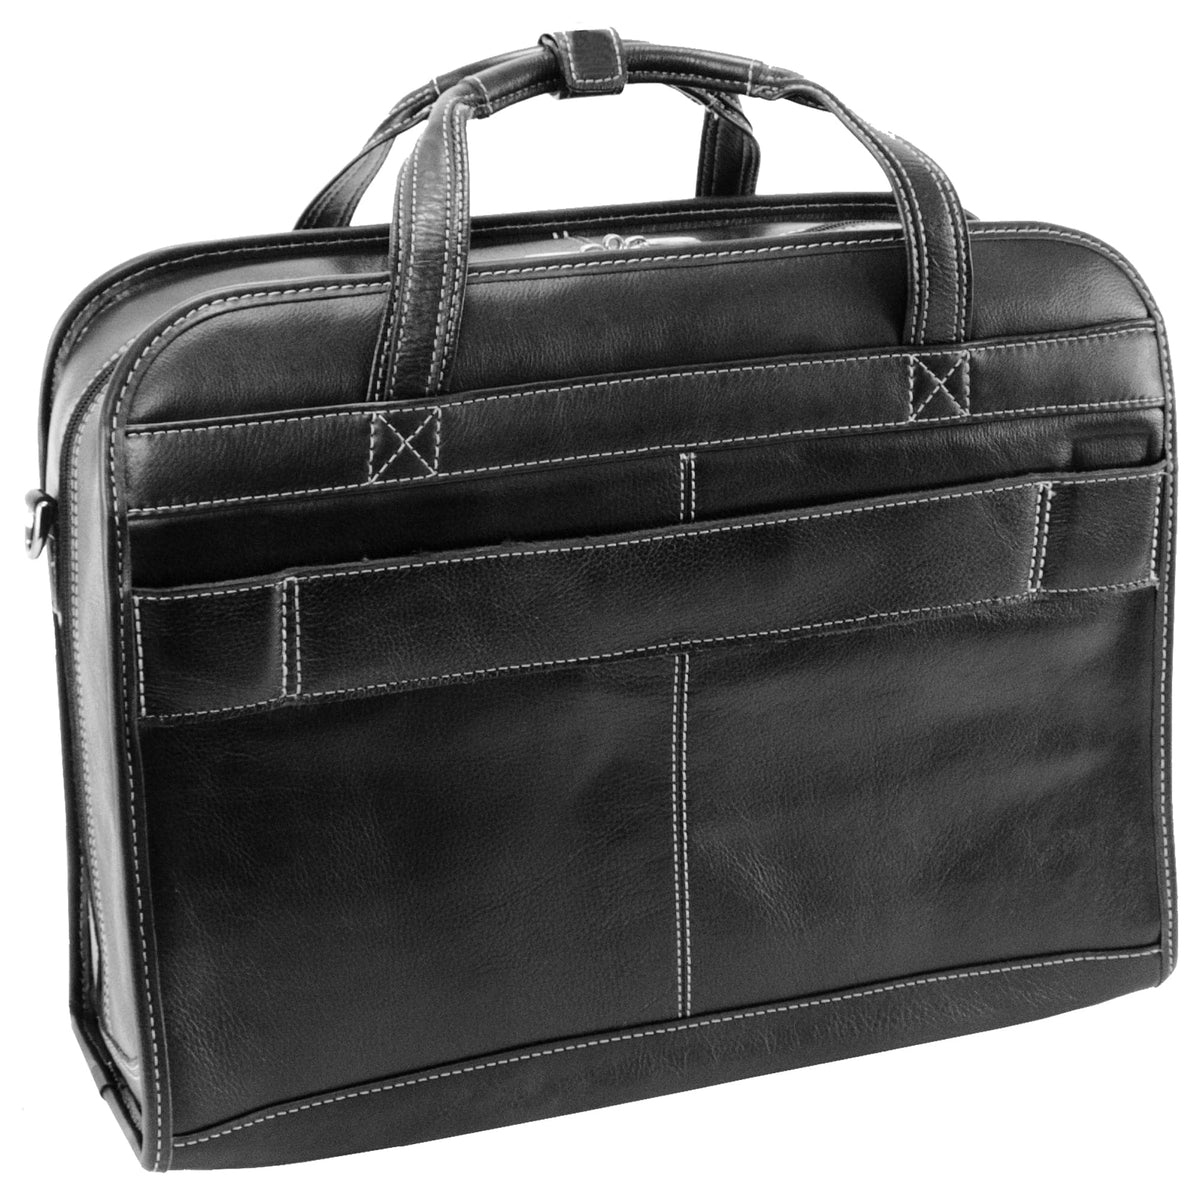 McKlein USA Carugetto 15" Leather Patented Detachable -Wheeled Laptop Briefcase